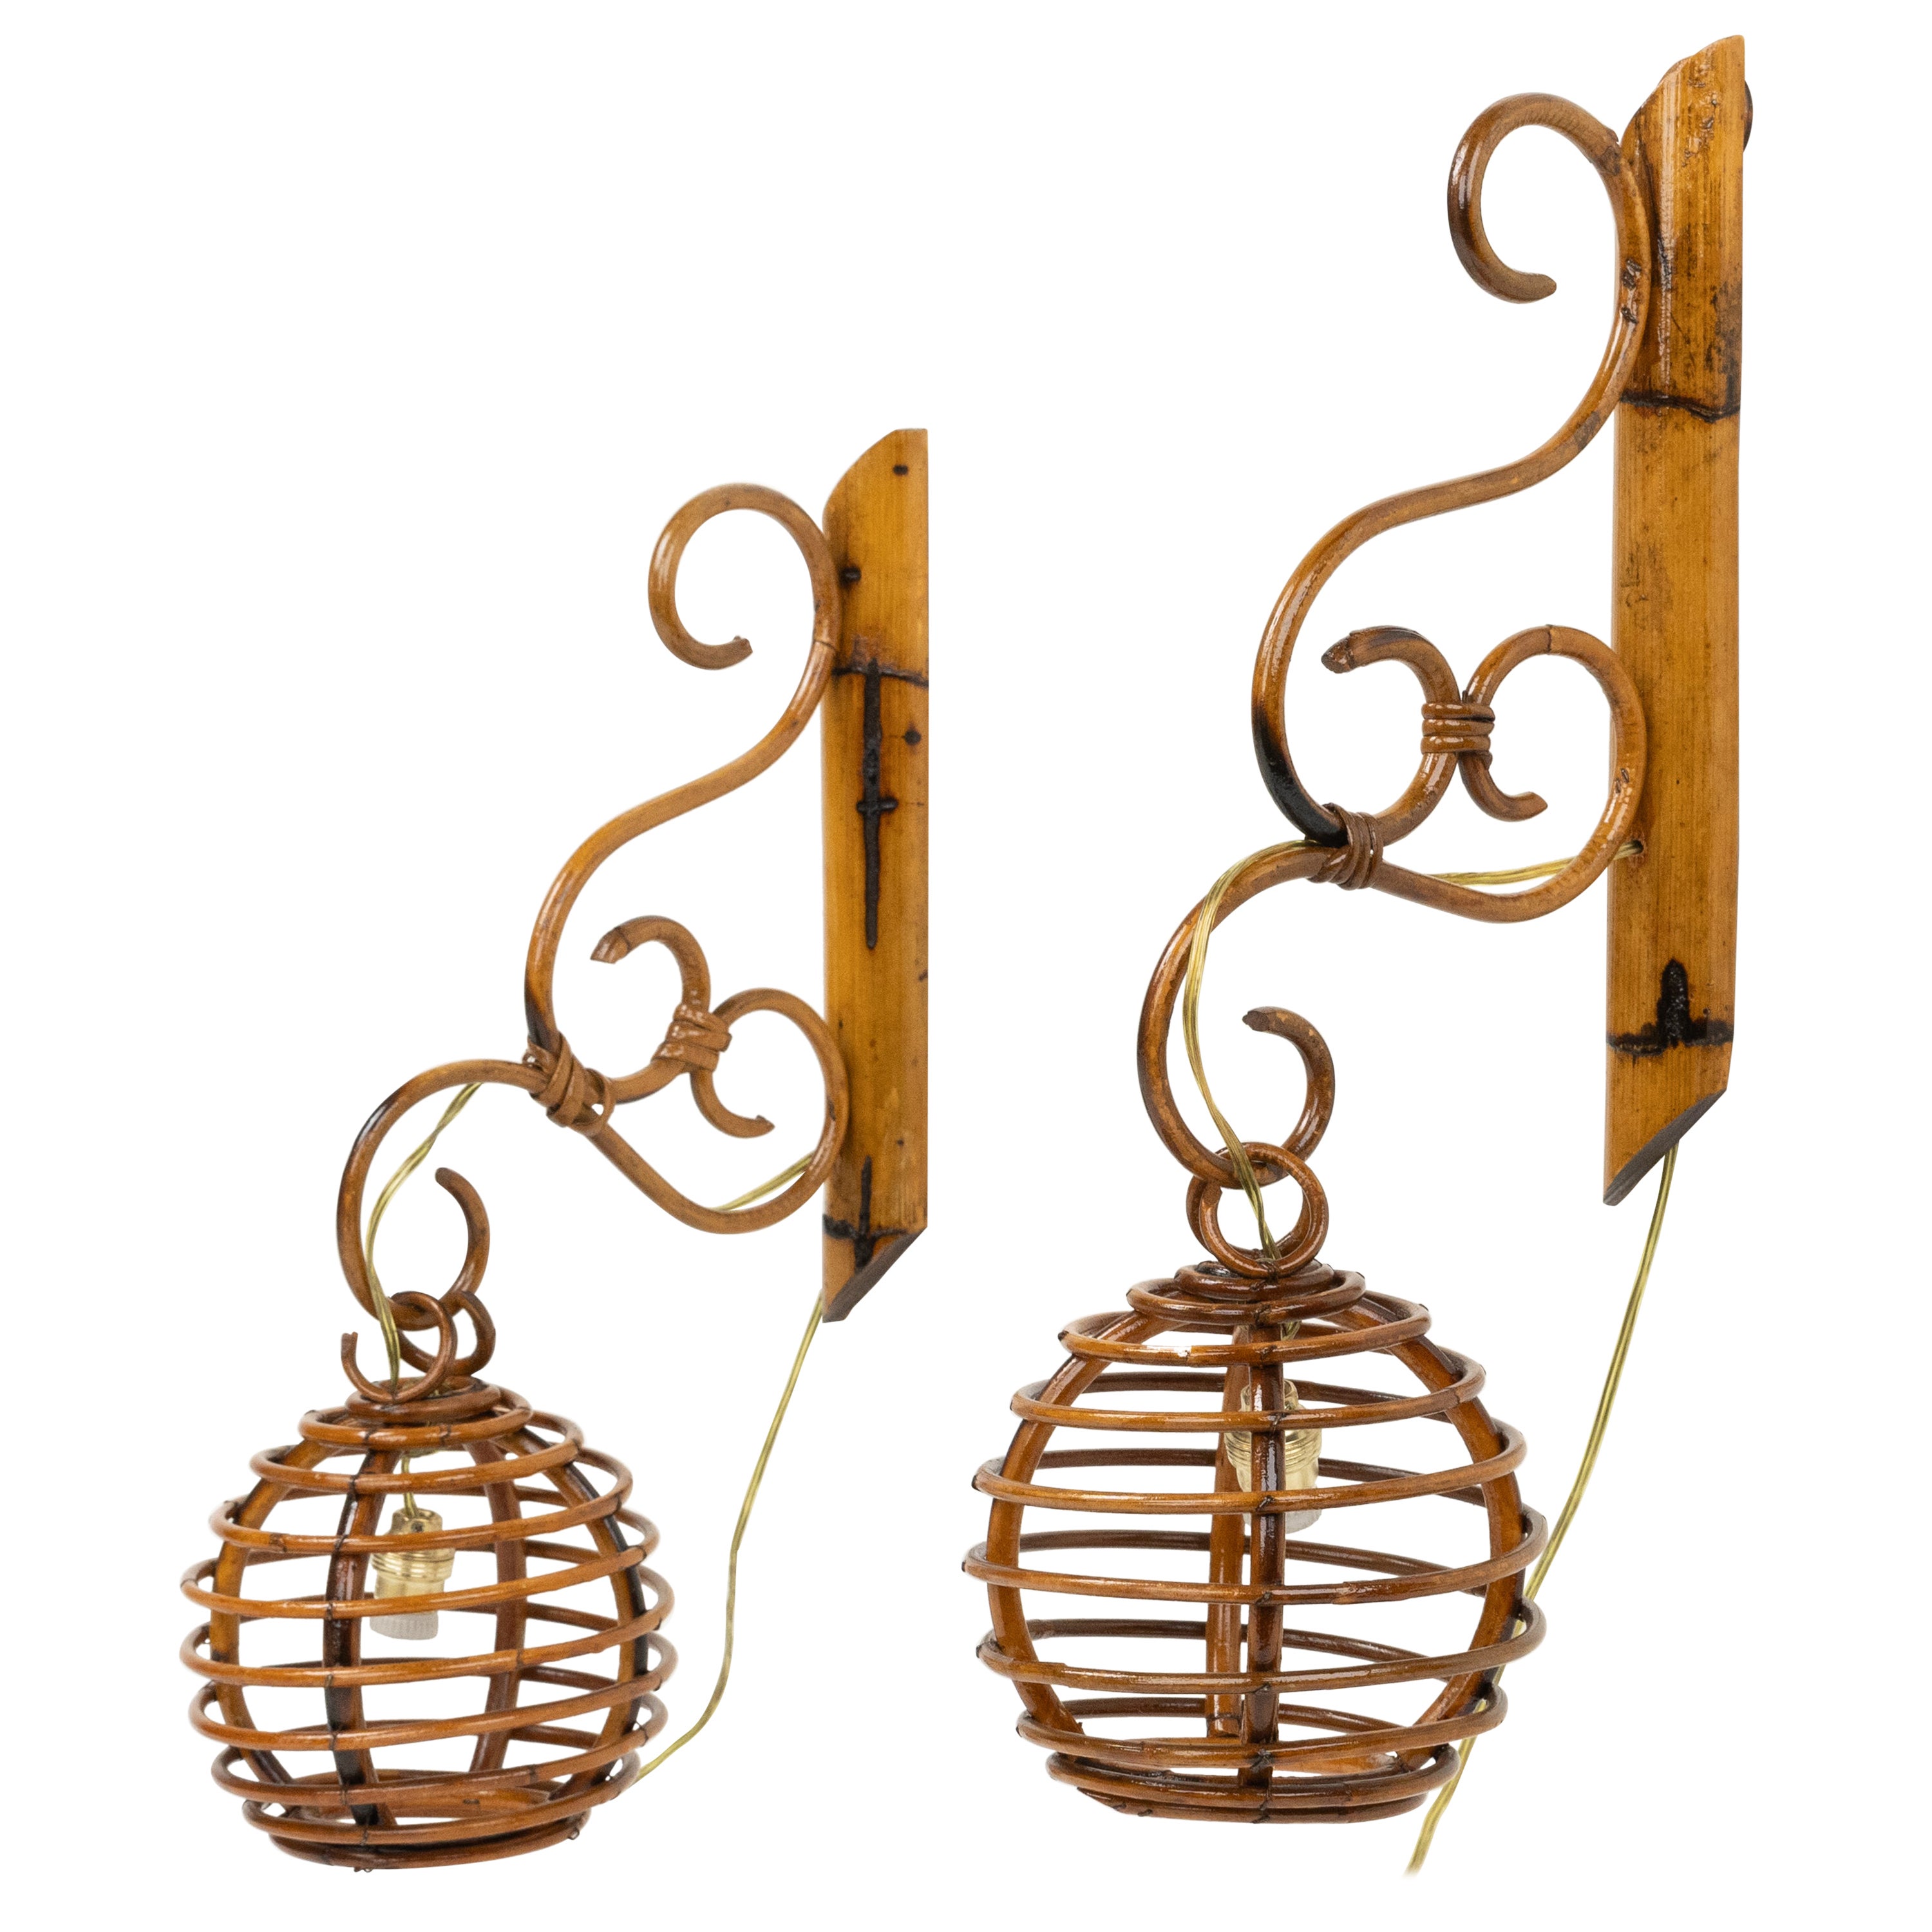 Midcentury Pair of Sconces in Bamboo and Rattan Louis Sognot Style, Italy 1960s For Sale